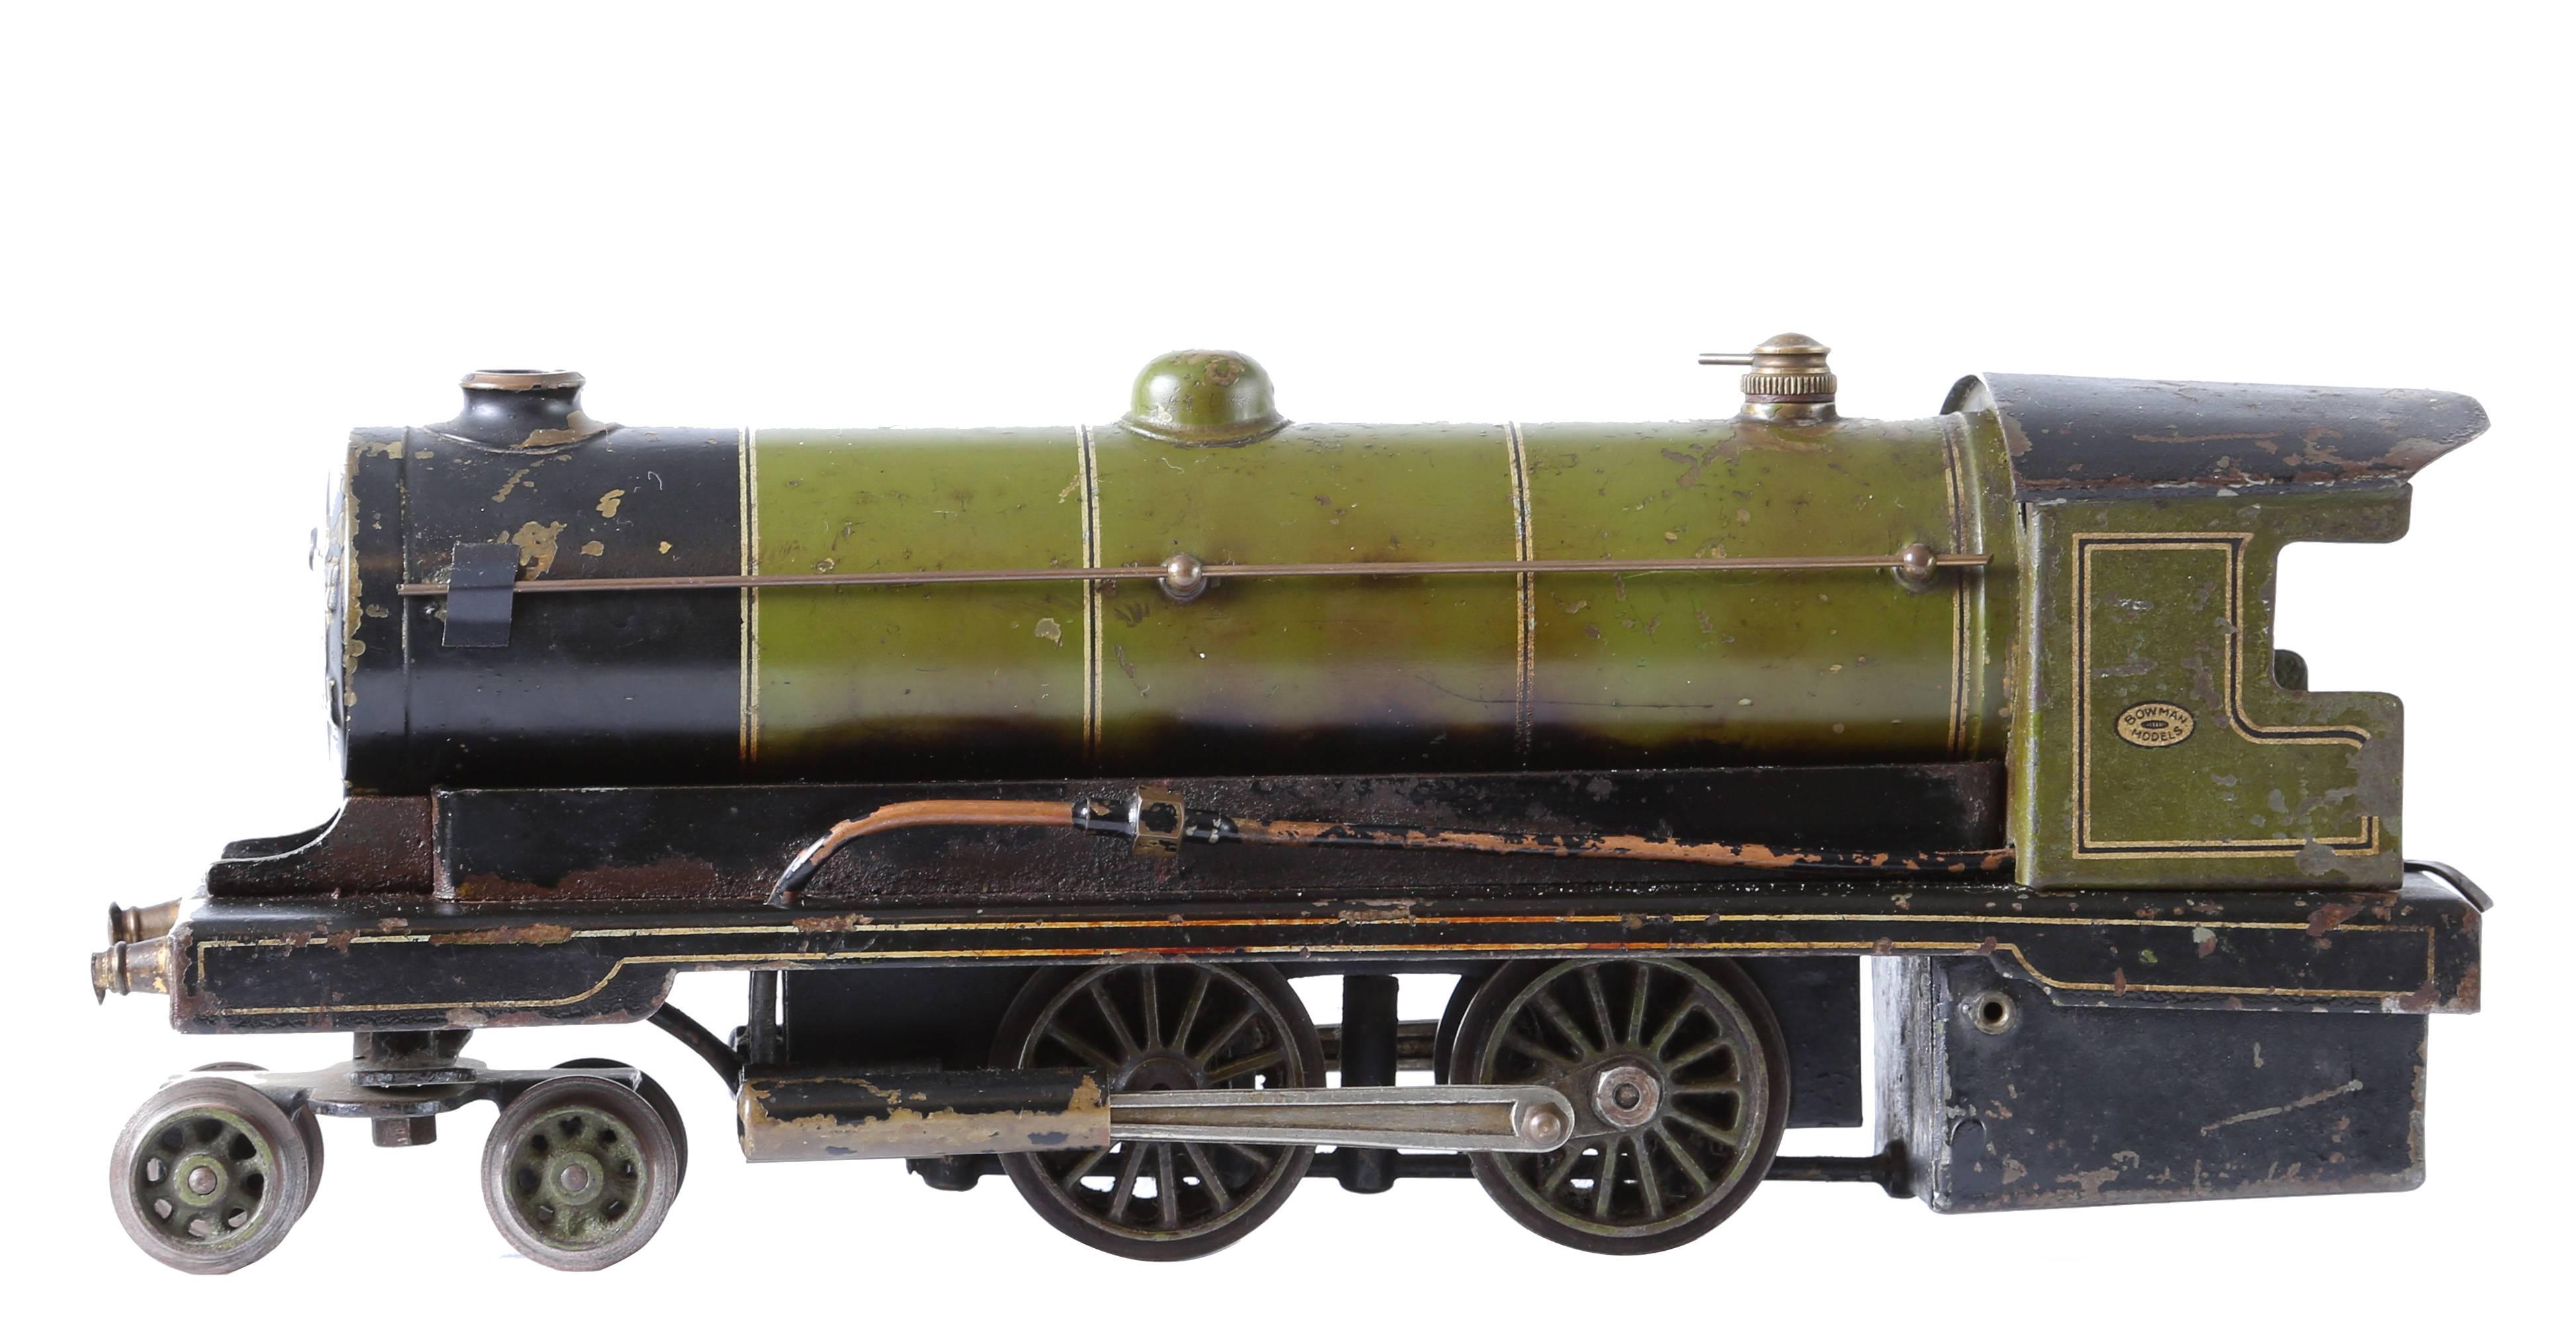 1927-1935 Bowman model L.N.E.R. #234 steam Locomotive.

Solid drawn brass boiler. New Bowman safety valve. Overflow plug for filling to correct level. Steam exhausts through chimney. Solid drawn brass cylinders 3/8